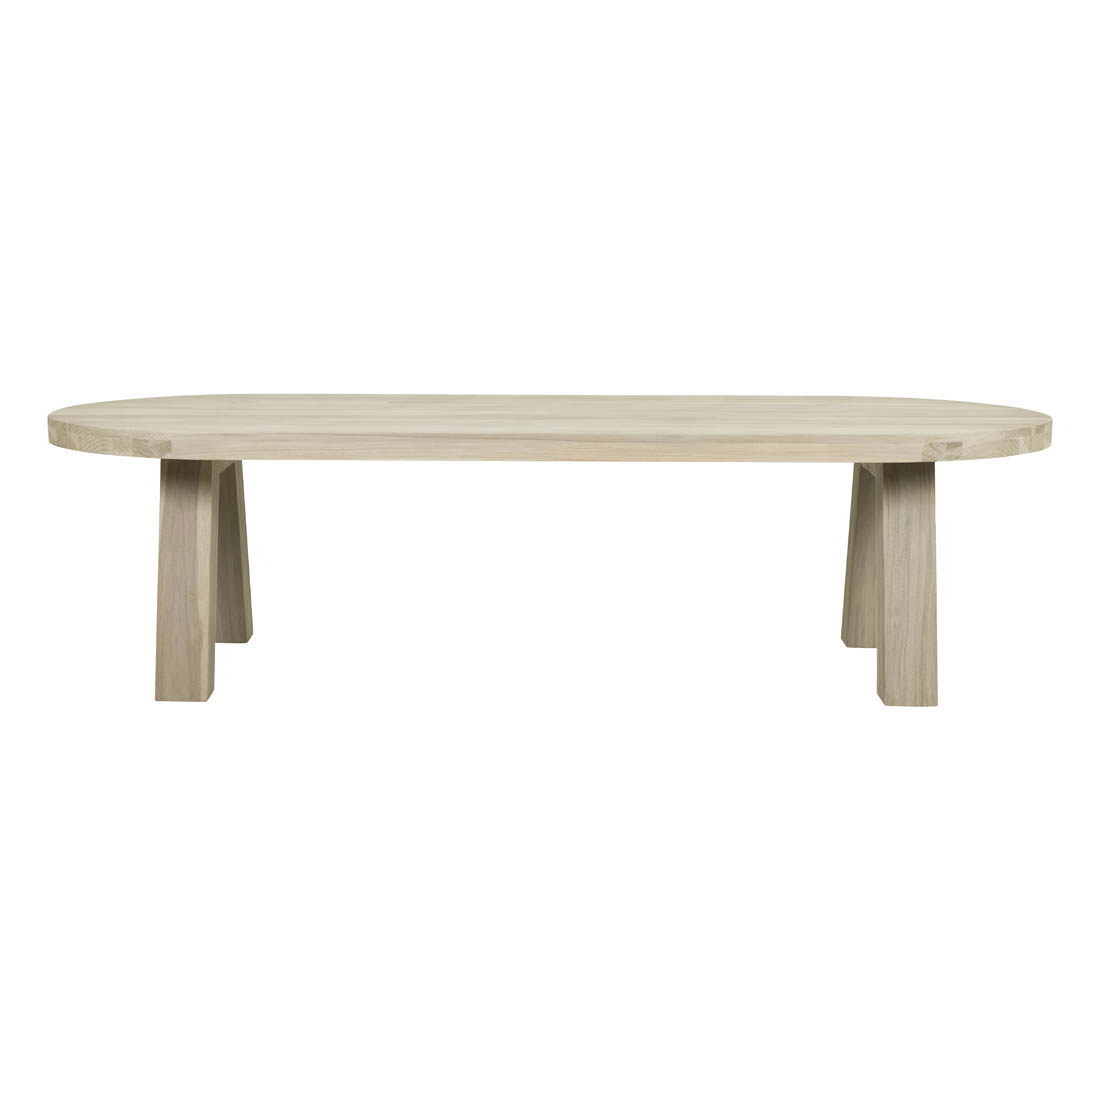 Tide Drift Oval Dining Tables image 6